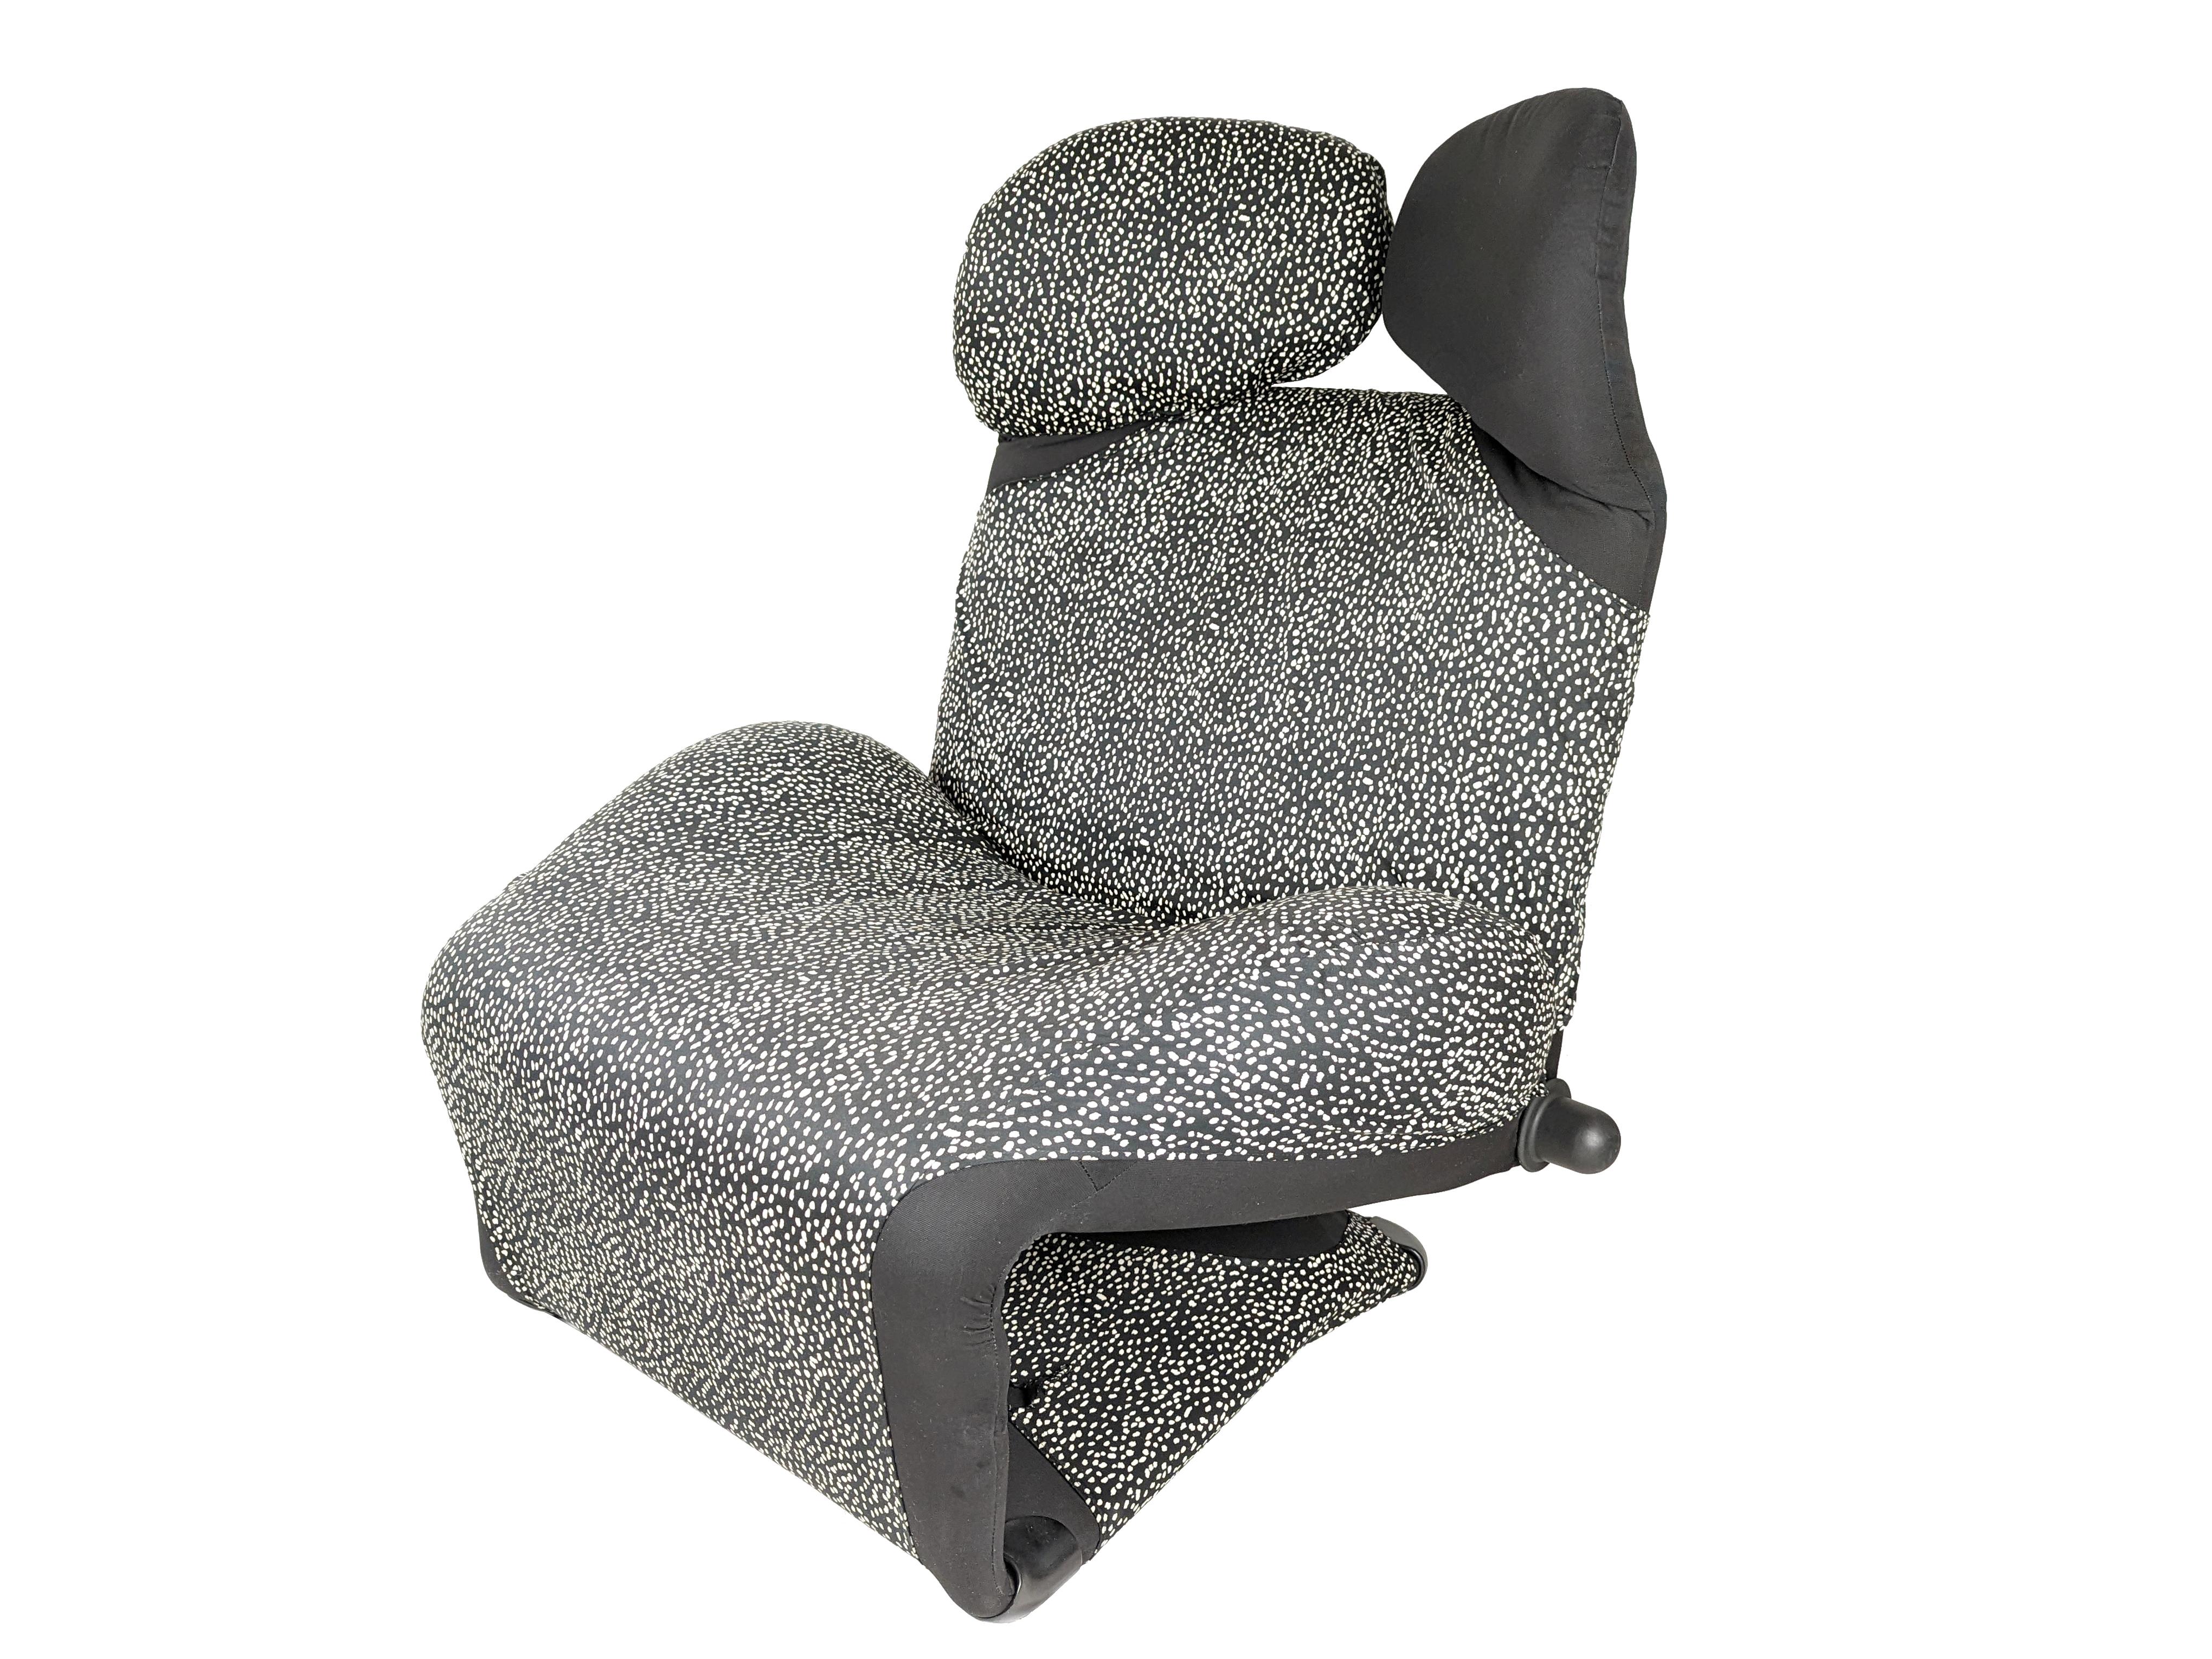 This versatile lounge chair is made of a steel frame, padding and foam. It feautures two side knobs in order to adjust the back; the headrest is divided in two parts, each with an independent reclining position. It is possible to change the armchair